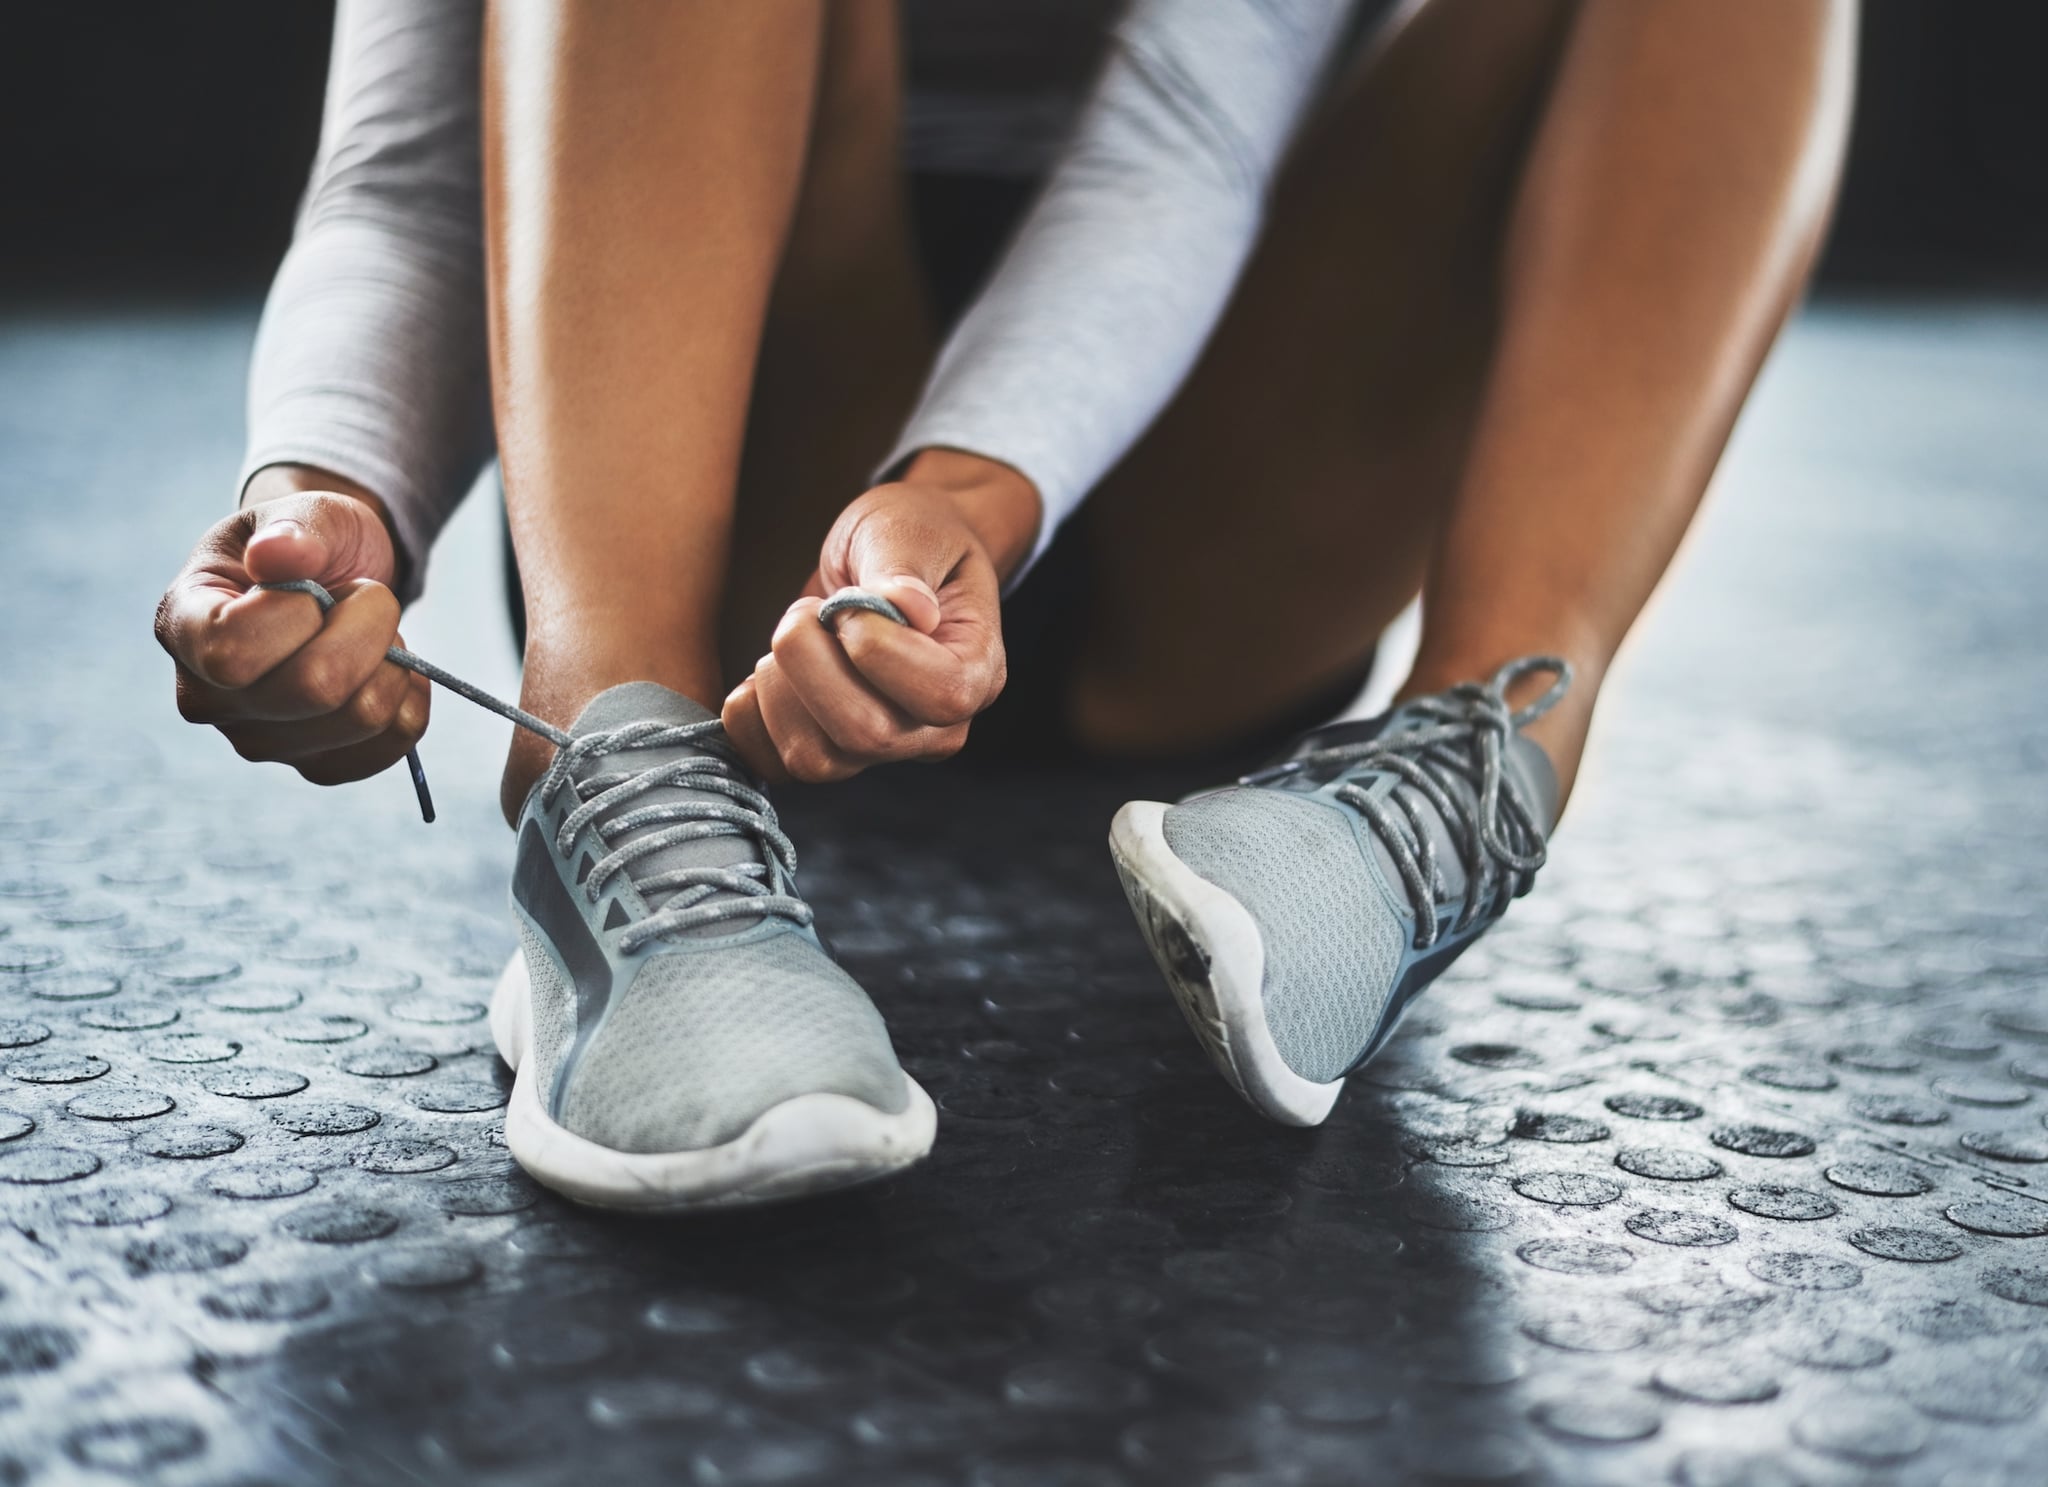 Cropped shot of a woman tying her shoelaces in a gym